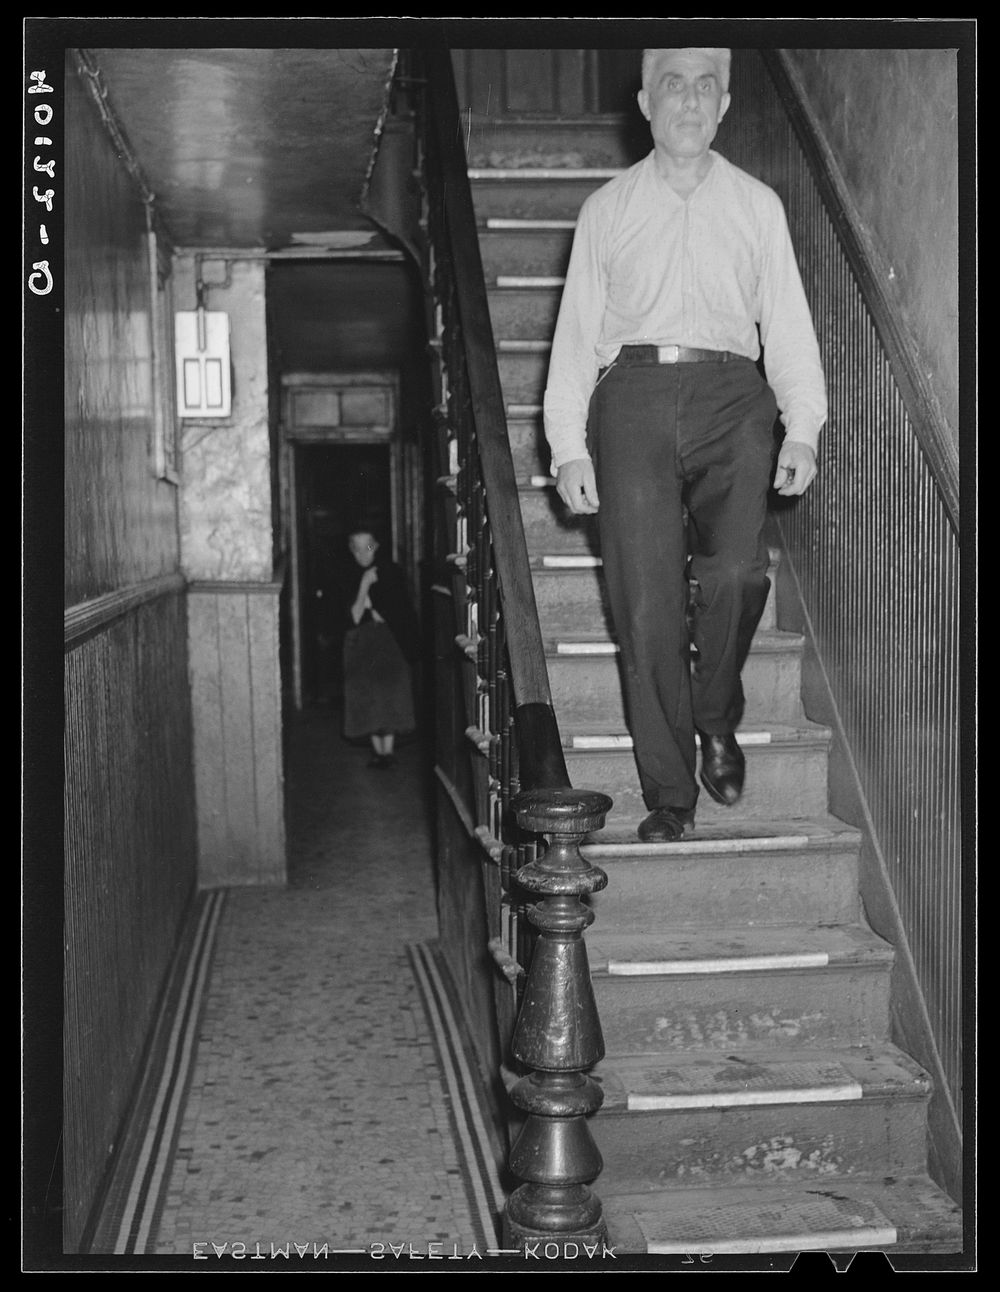 [Untitled photo, possibly related to: New York, New York. 1938(?). A hallway at 340 East 63rd Street]. Sourced from the…